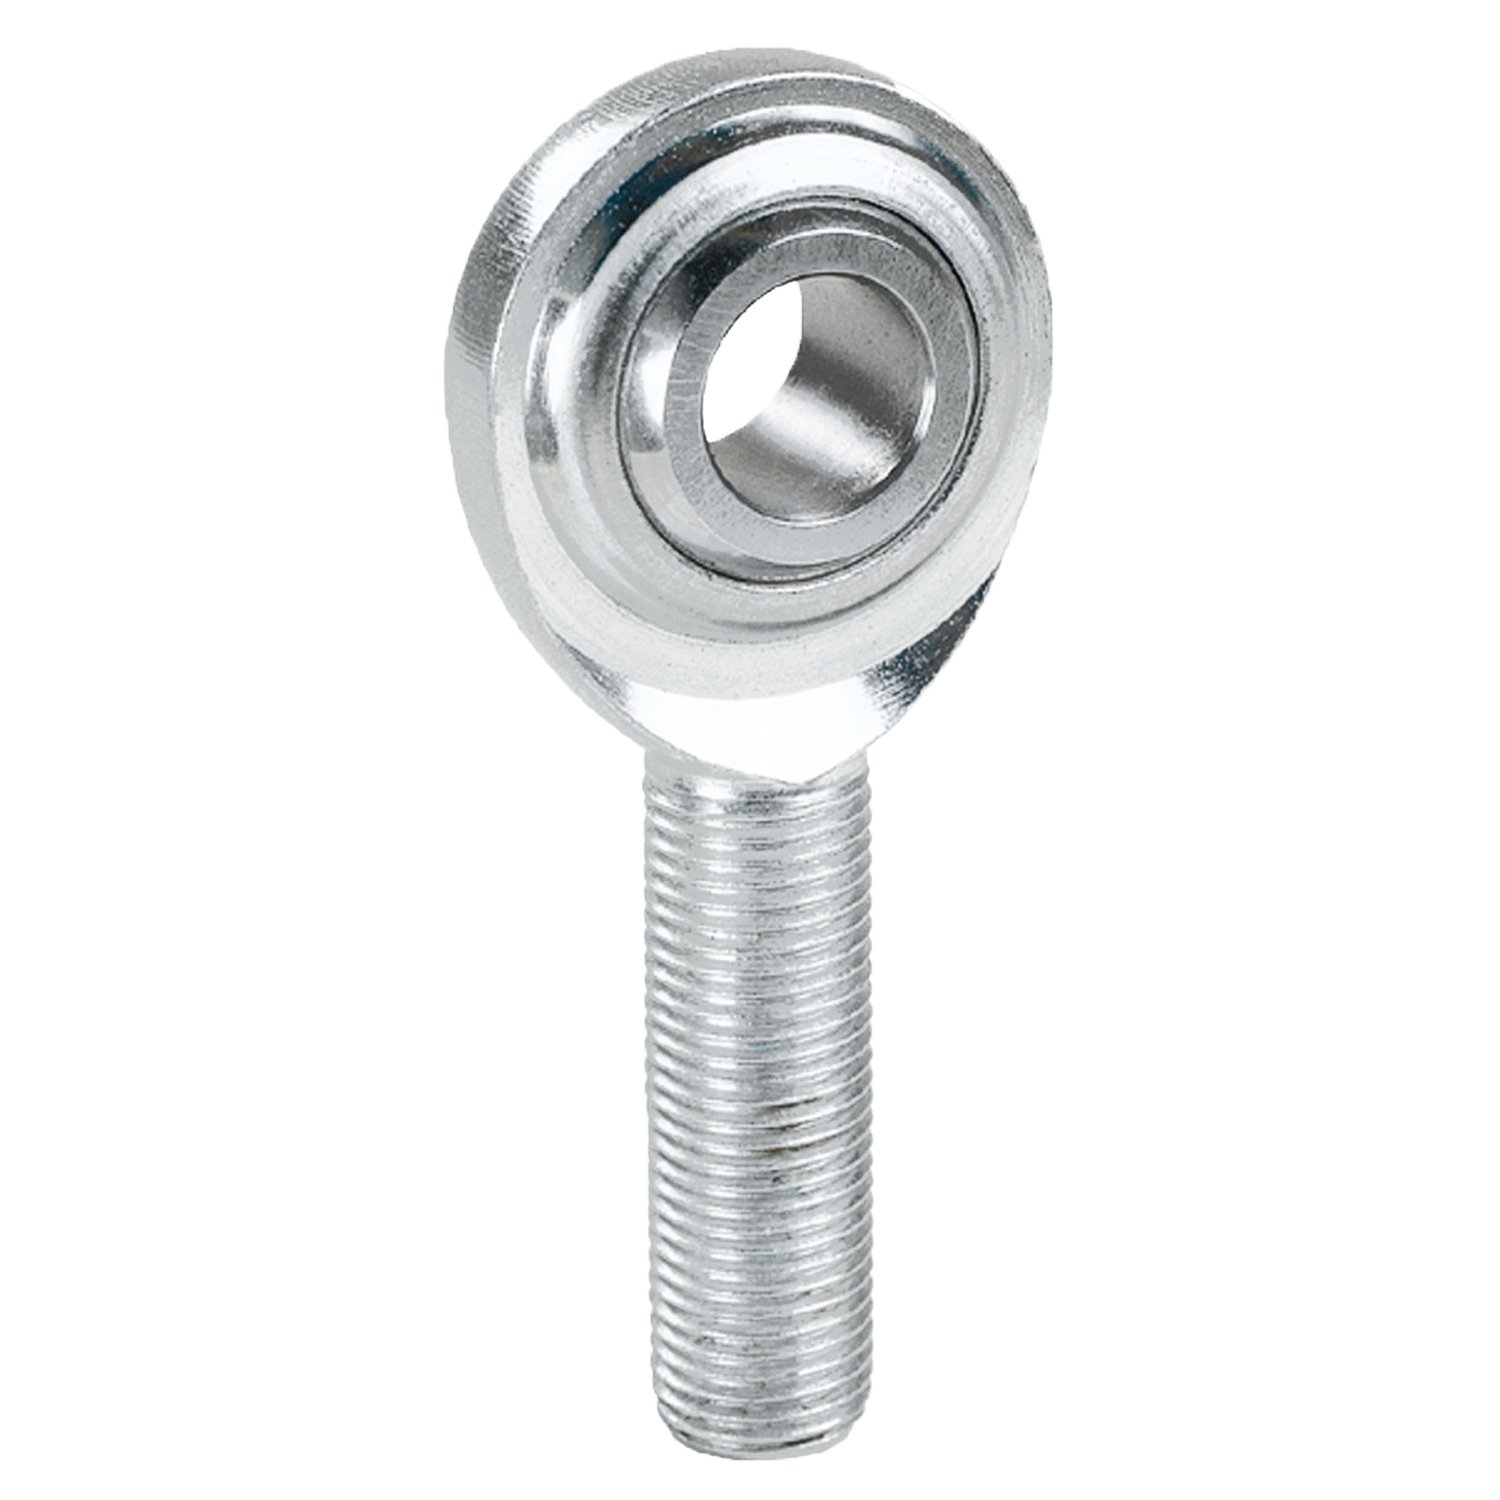 MGM-T Series Stainless Steel Rod End Hole I.D.: 5 mm